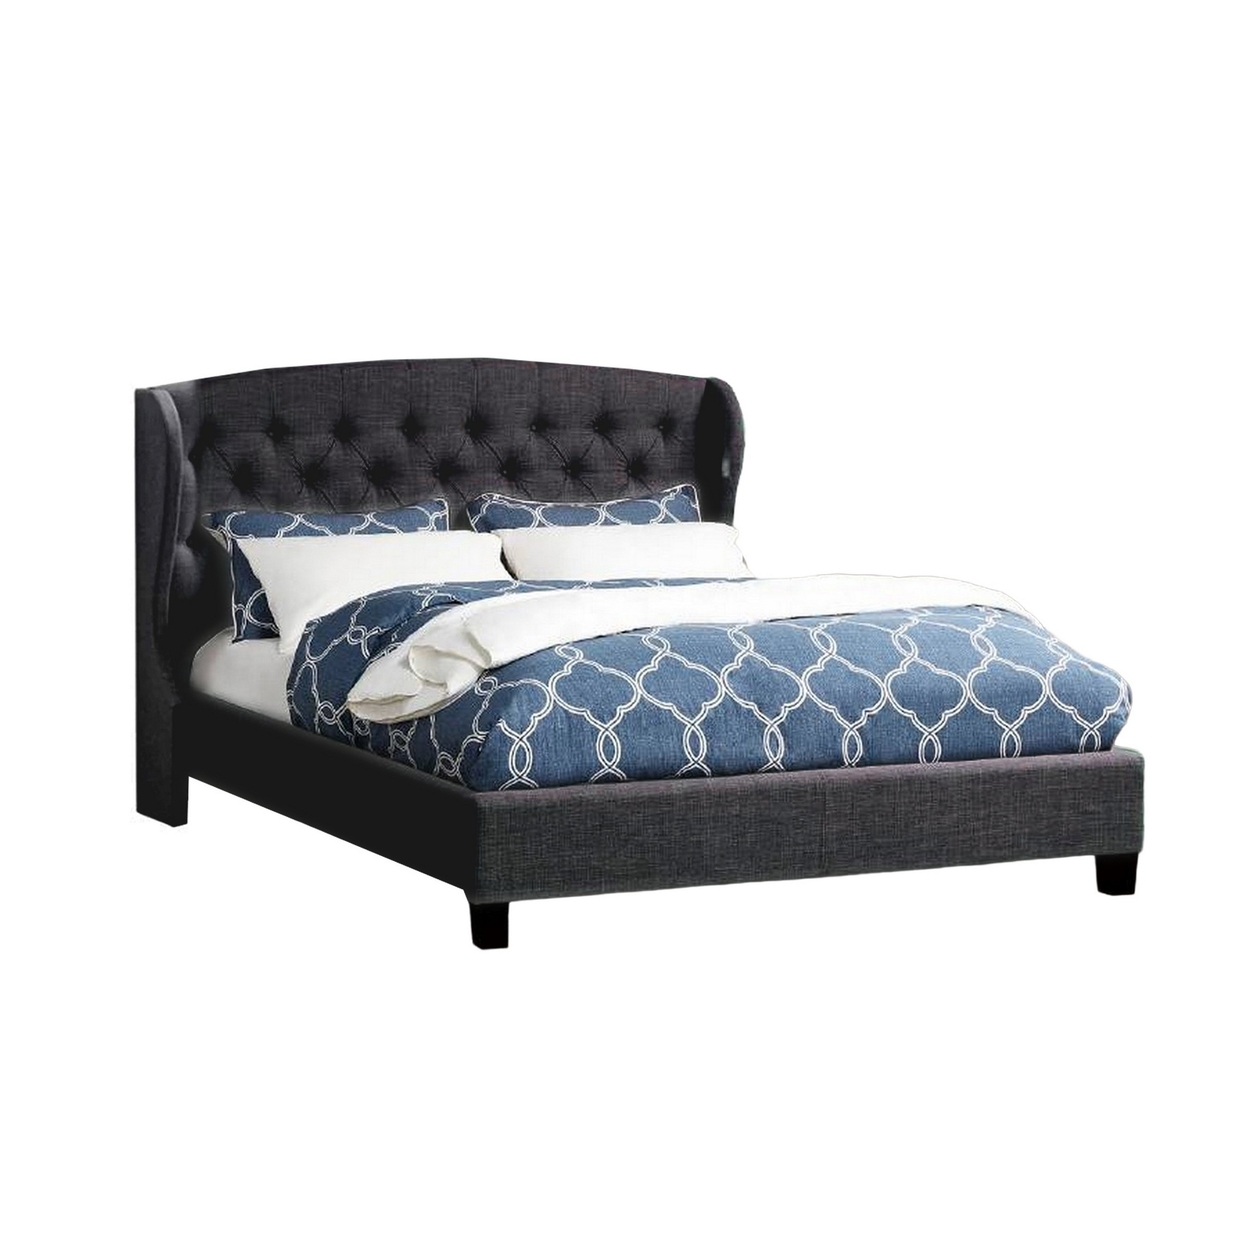 Jimi Full Bed, Button Tufted Headboard, Charcoal Gray Polyester Upholstery- Saltoro Sherpi